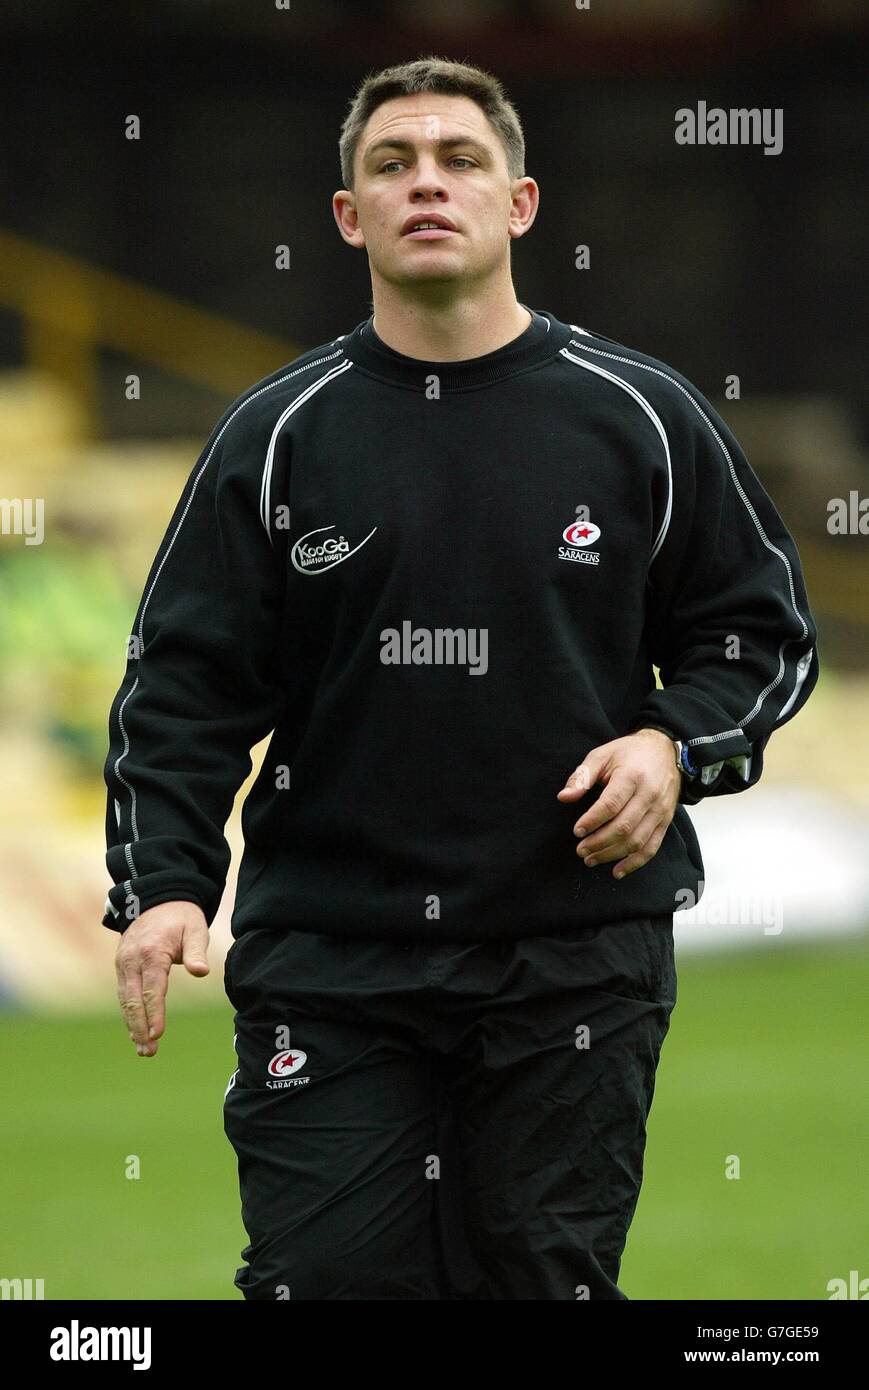 Library file dated 26/09/2004 of Saracens coach Rod Kafer during the Zurich Premiership match at Vicarage Road, Watford. Saracens today, Tuesday December 14, 2004 confirmed the departure of head coach Rod Kafer and named Steve Diamond as his replacement. Australian Kafer resigned following a series of results in the Zurich Premiership which have come up short of expectations, claiming he was eager to pursue ``opportunities elsewhere''. See PA story RUGBYU Saracens. PRESS ASSOCIATION Photo. Photo credit should read: David Davies/PA Stock Photo